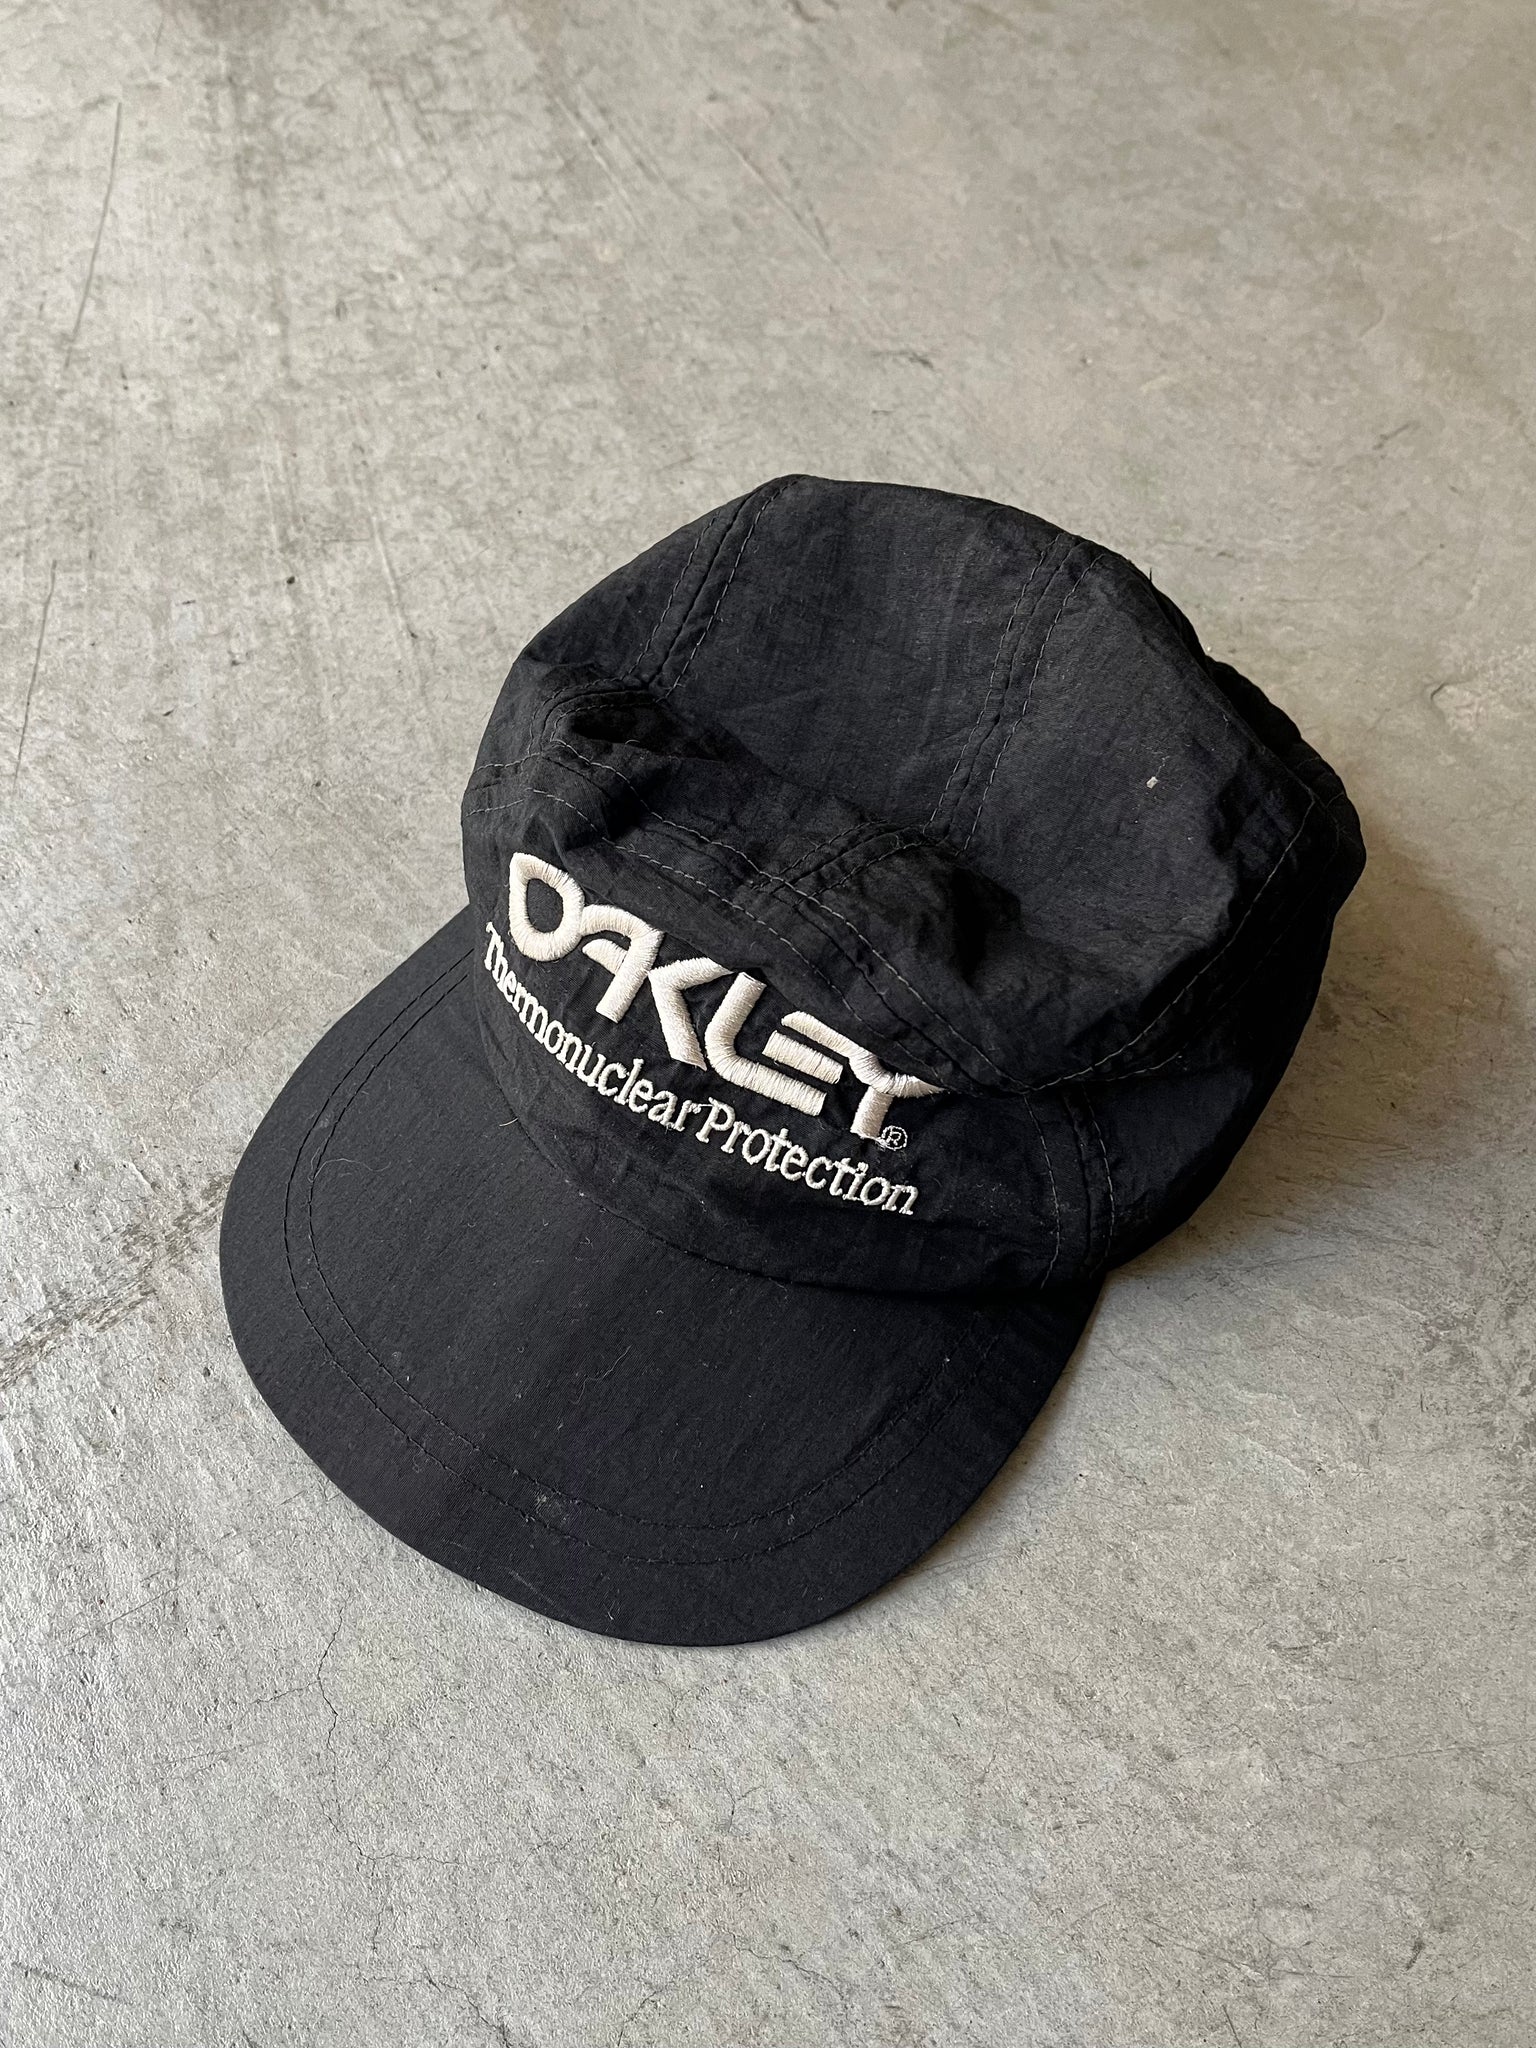 1990S OAKLEY THERMONUCLEAR PROTECTION HAT